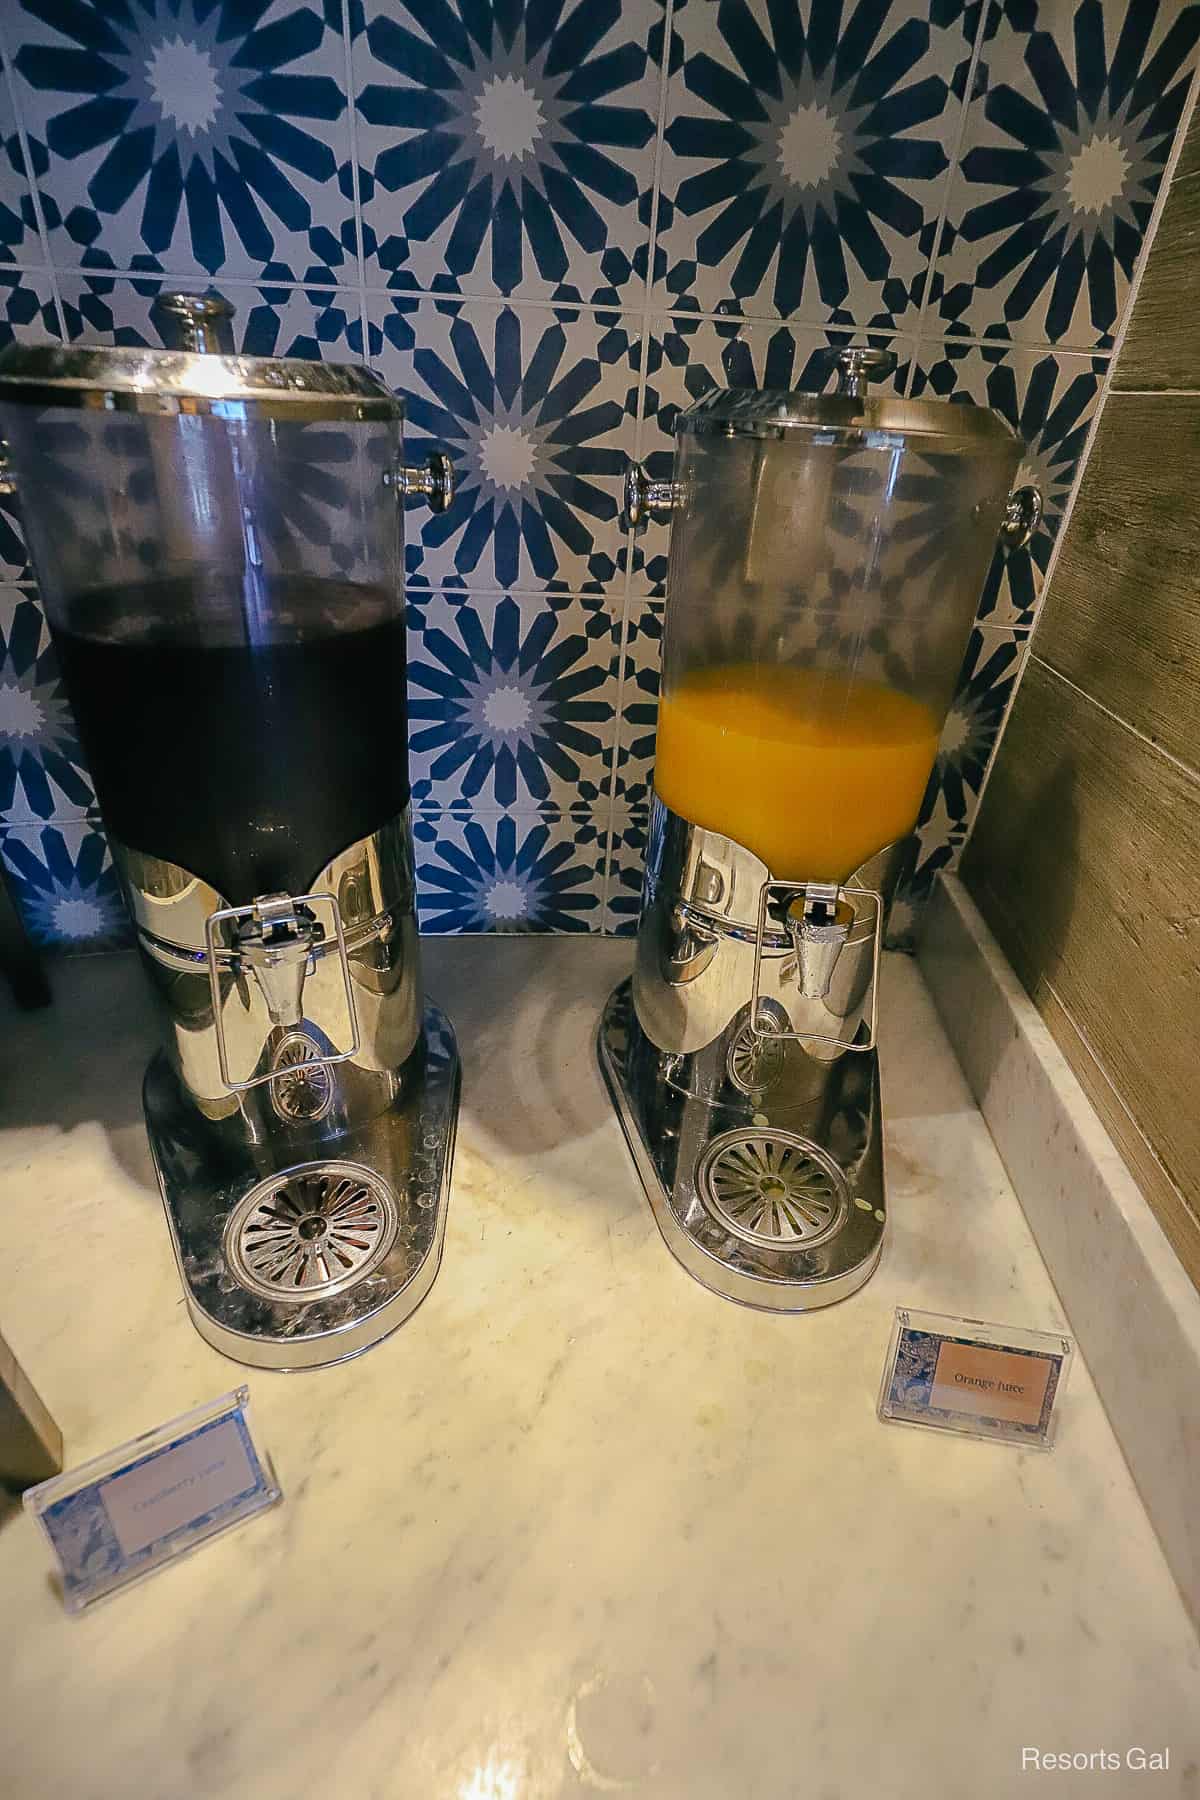 cranberry and orange juices in dispensers 